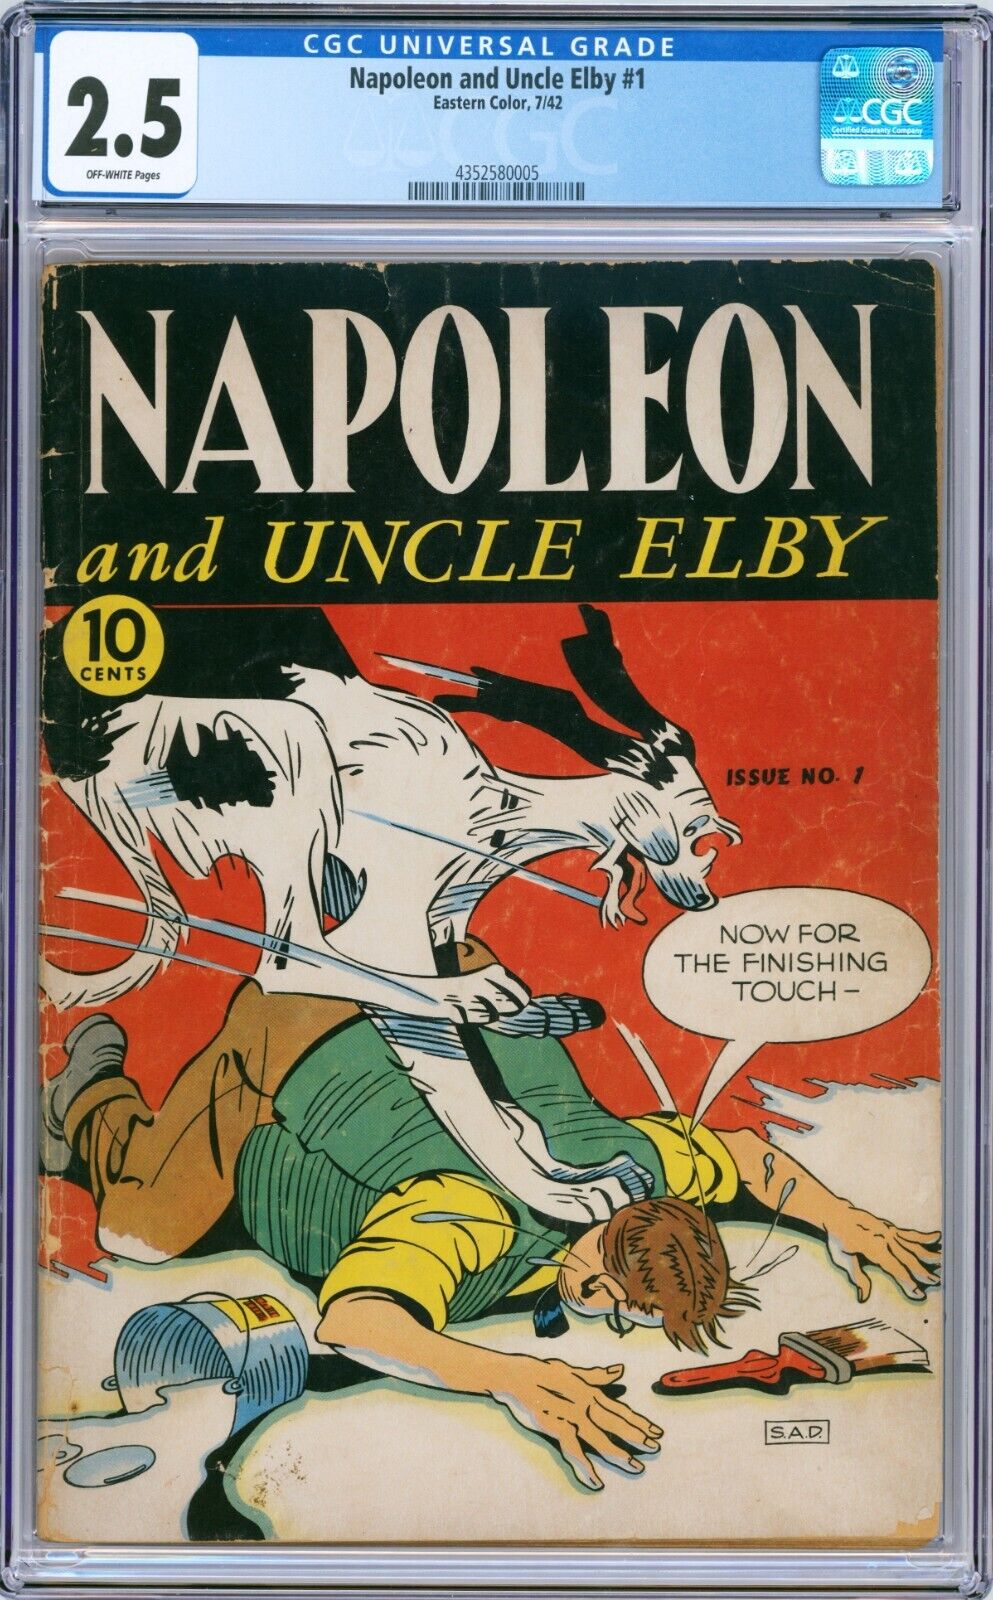 Napoleon and Uncle Elby #1 1942 Eastern Color CGC 2.5